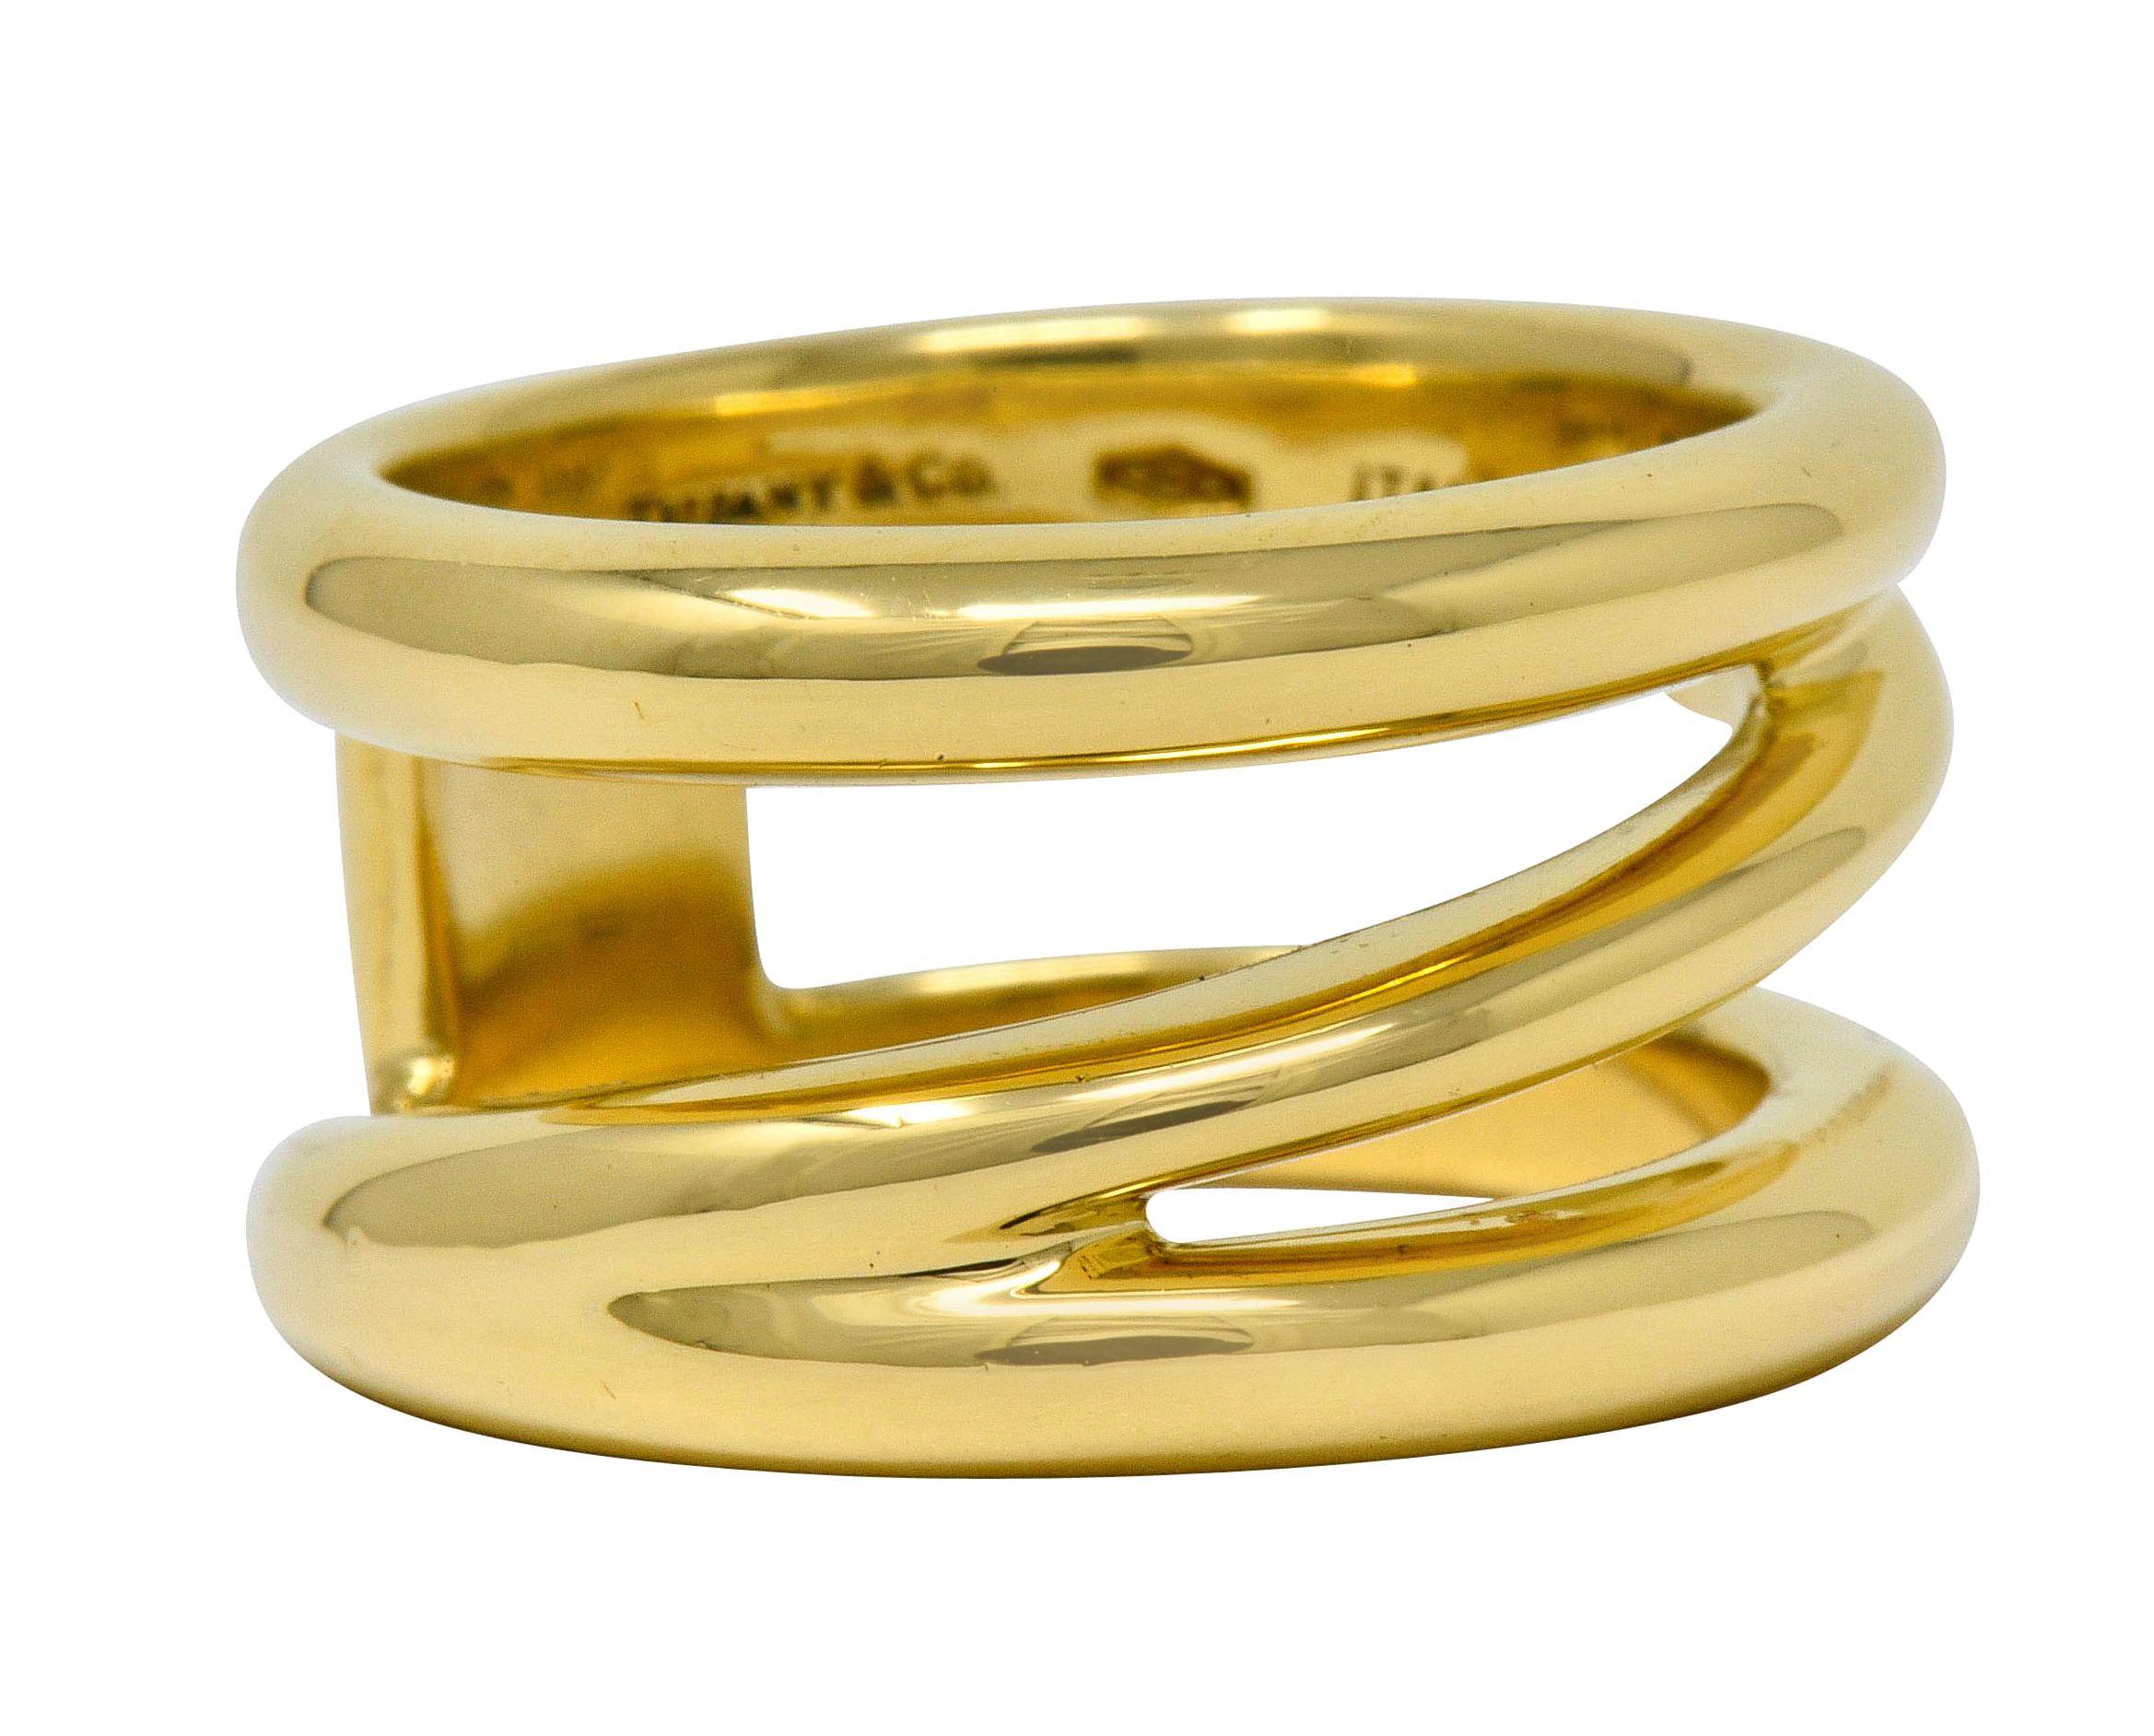 Wide band ring designed as three segments of gold that zig-zag into one another

Featuring a bright polish

Fully signed Tiffany & Co. Italy

Stamped 750 for 18 karat gold

Circa: 1990s

Ring Size: 5 3/4 & sizable

Measures: 11.1 mm wide and sits